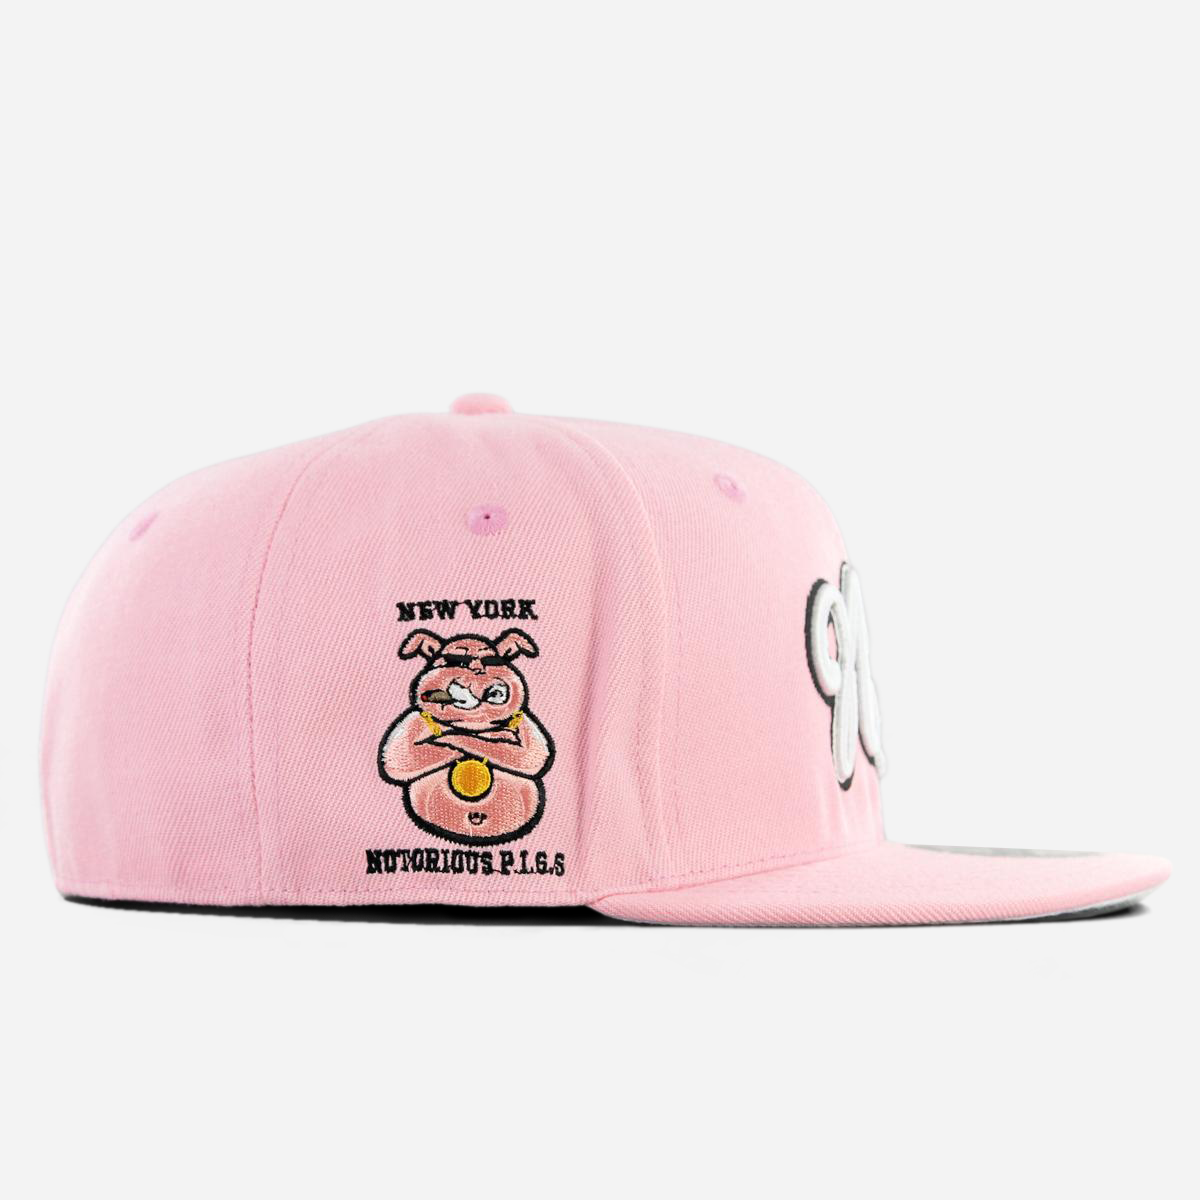 New York Notorious Pigs Fitted Baby Pink